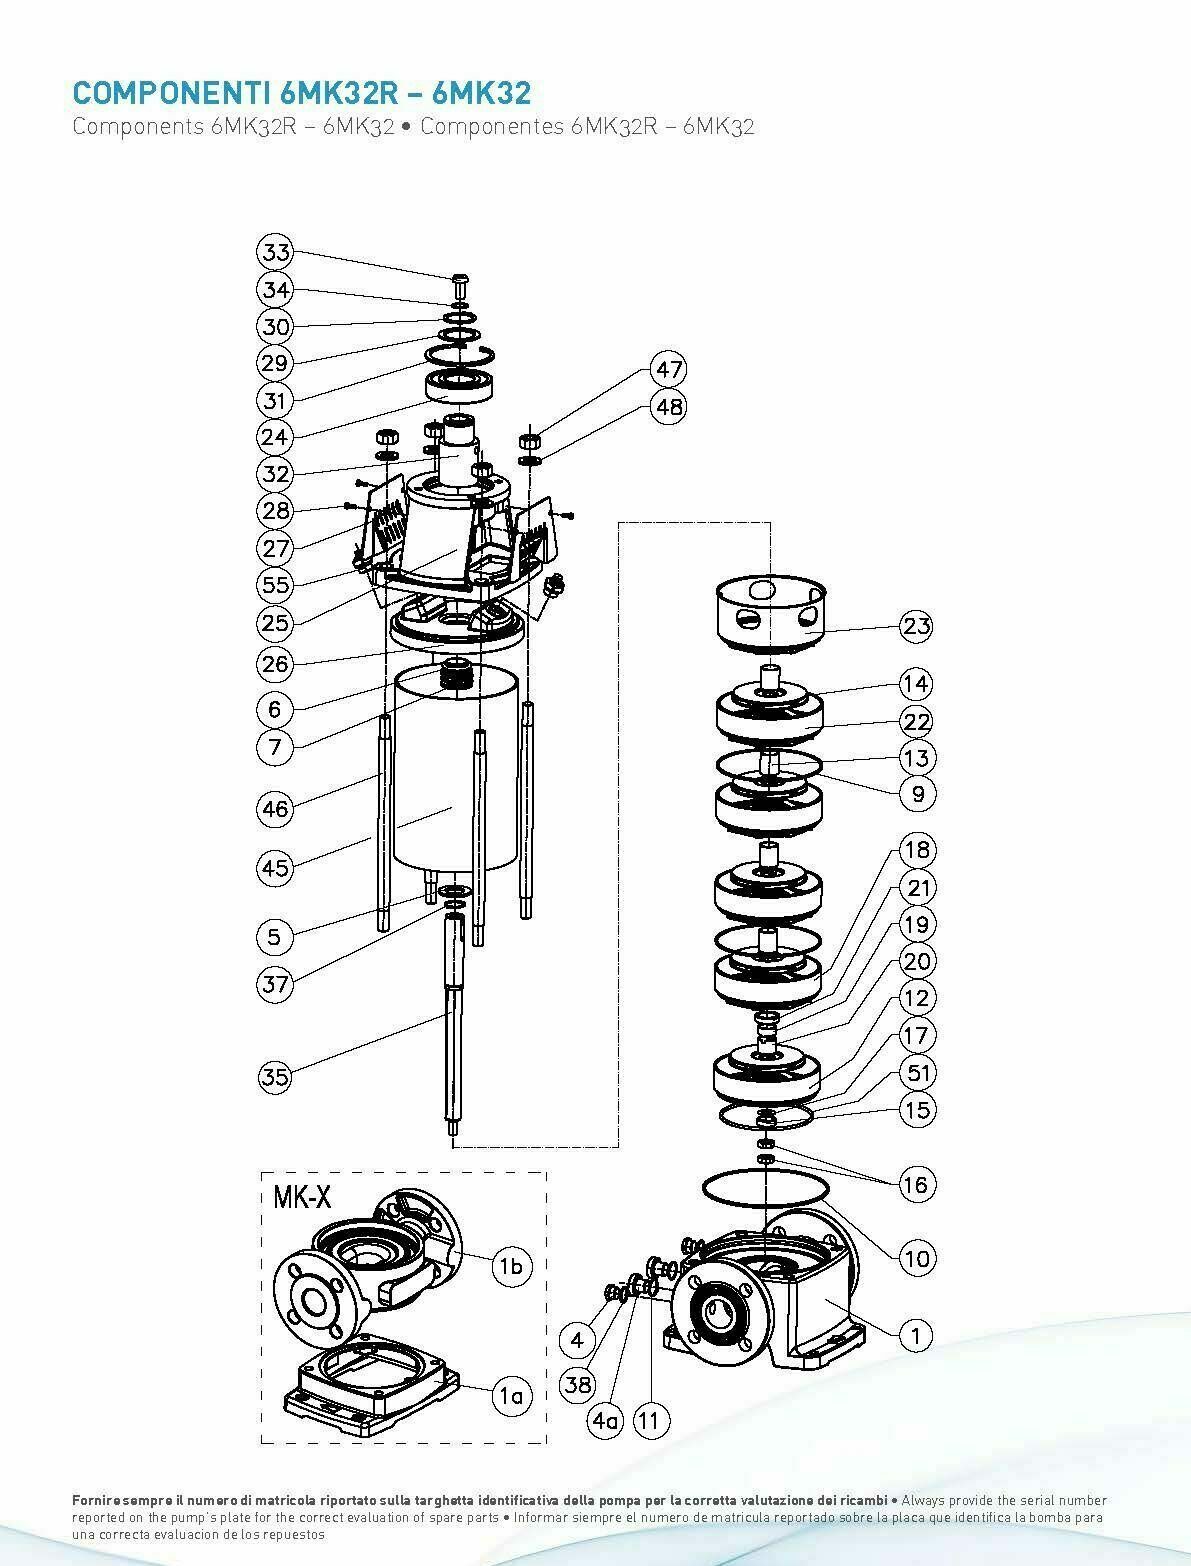 Vertical Multi-stage Electric Pump — 20 HP, 15 Kw, 460V - SAER 6PMK 100/A3 - Components